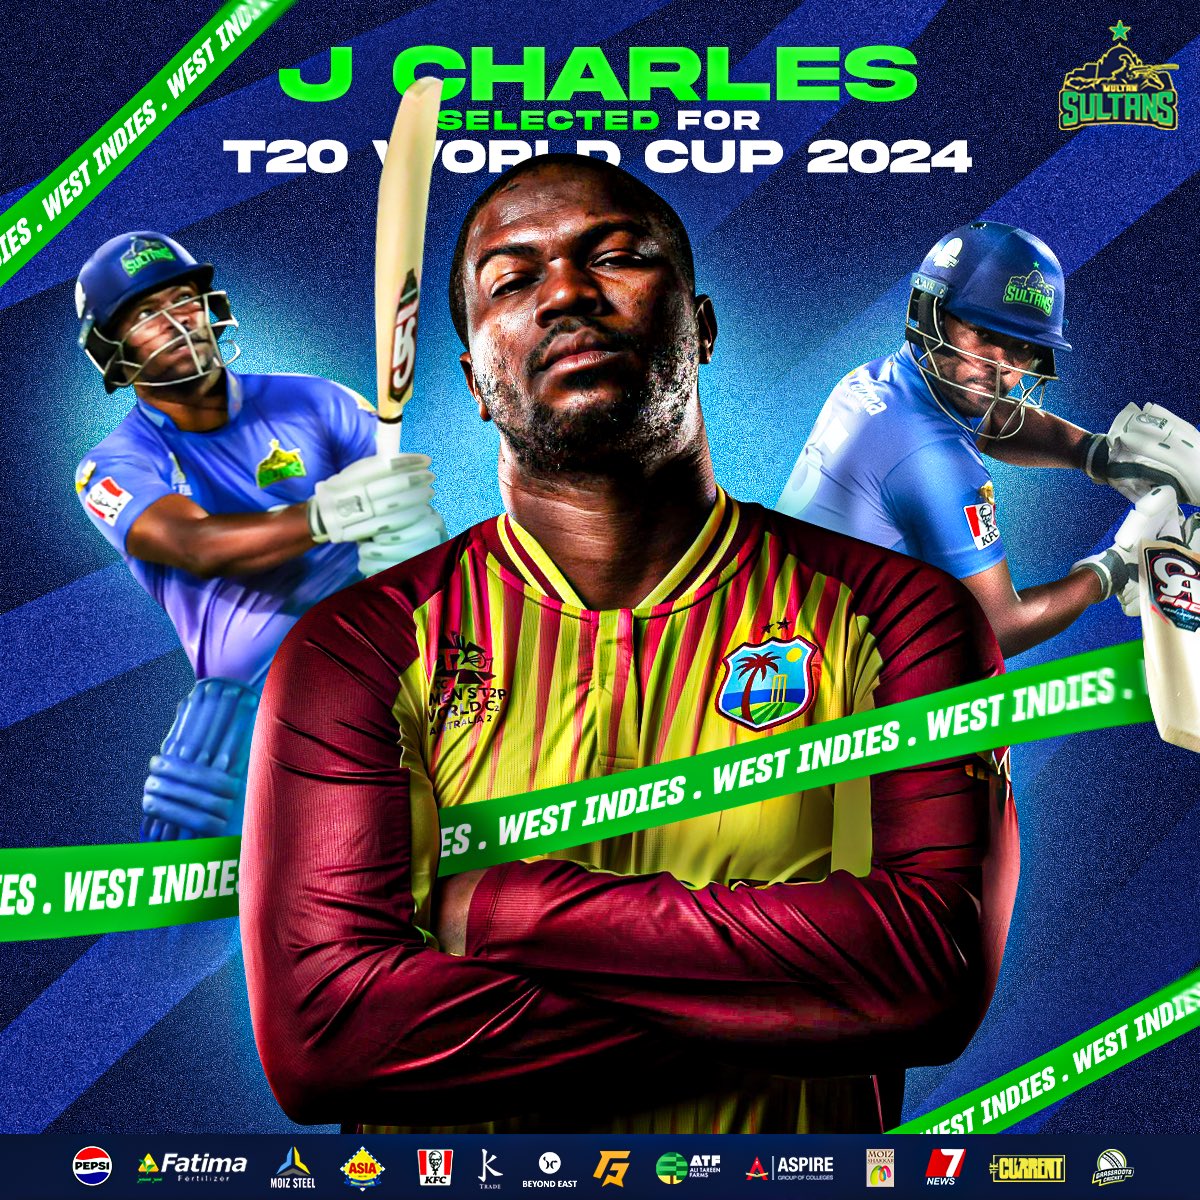 BIG HITS HEADING TO THE BIG TOURNAMENT! 💥 Sultan Johnson Charles has been named in the West Indies’ T20 World Cup squad! 🤩 #SultanSupremacy | #T20WorldCup